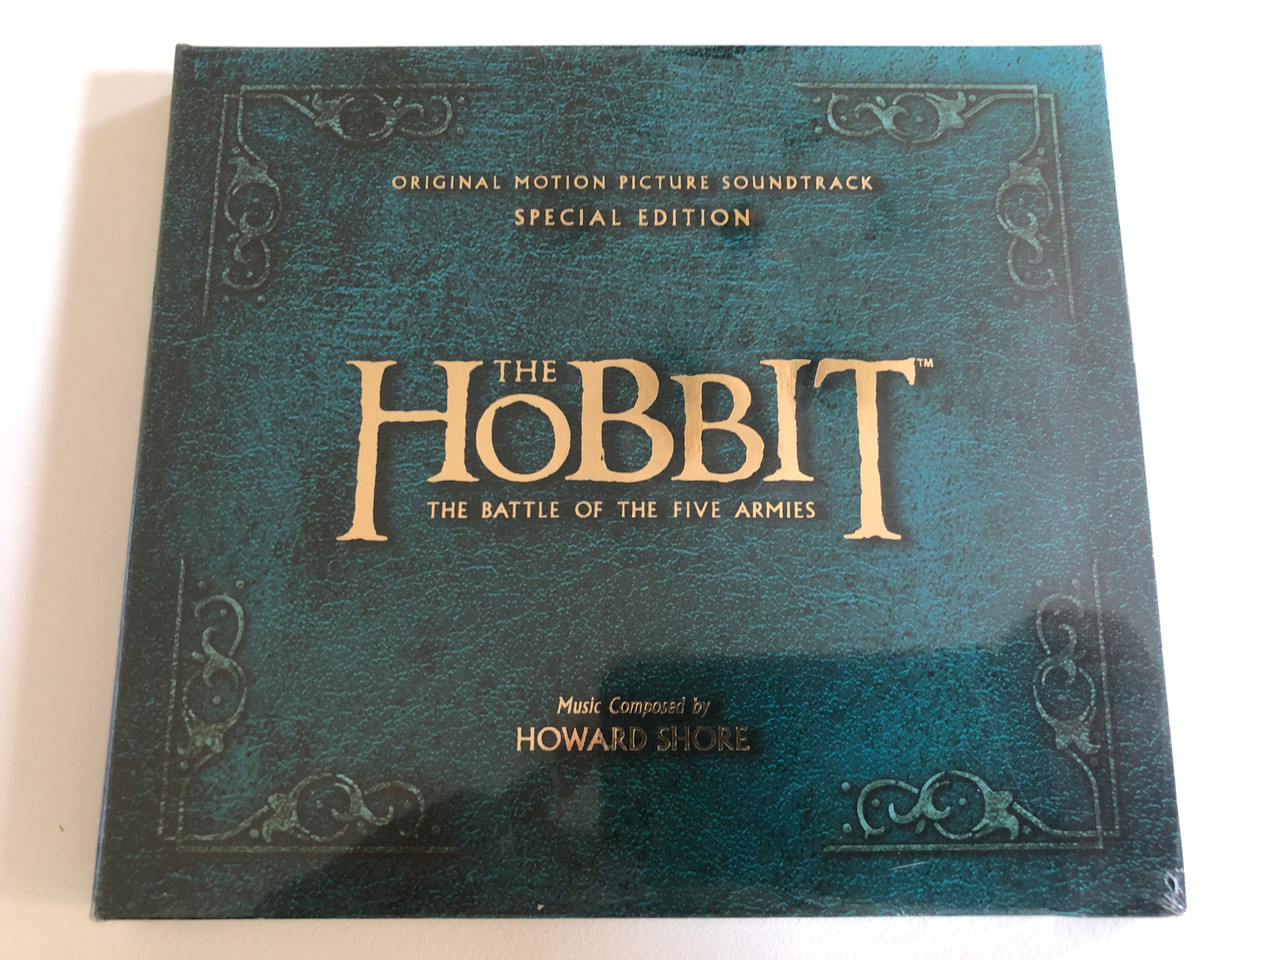 https://cdn10.bigcommerce.com/s-62bdpkt7pb/products/0/images/187945/The_Hobbit_The_Battle_of_the_Five_Armies_Motion_Picture_Soundtrack_Composed_By_Howard_Shore_2_CD_Special_Edition_Made_in_the_EU_1__58063.1629211846.1280.1280.JPG?c=2&_gl=1*1g9w6sd*_ga*MjAyOTE0ODY1OS4xNTkyNDY2ODc5*_ga_WS2VZYPC6G*MTYyOTIwOTAwNS4xNjMuMS4xNjI5MjExODQ4LjYw